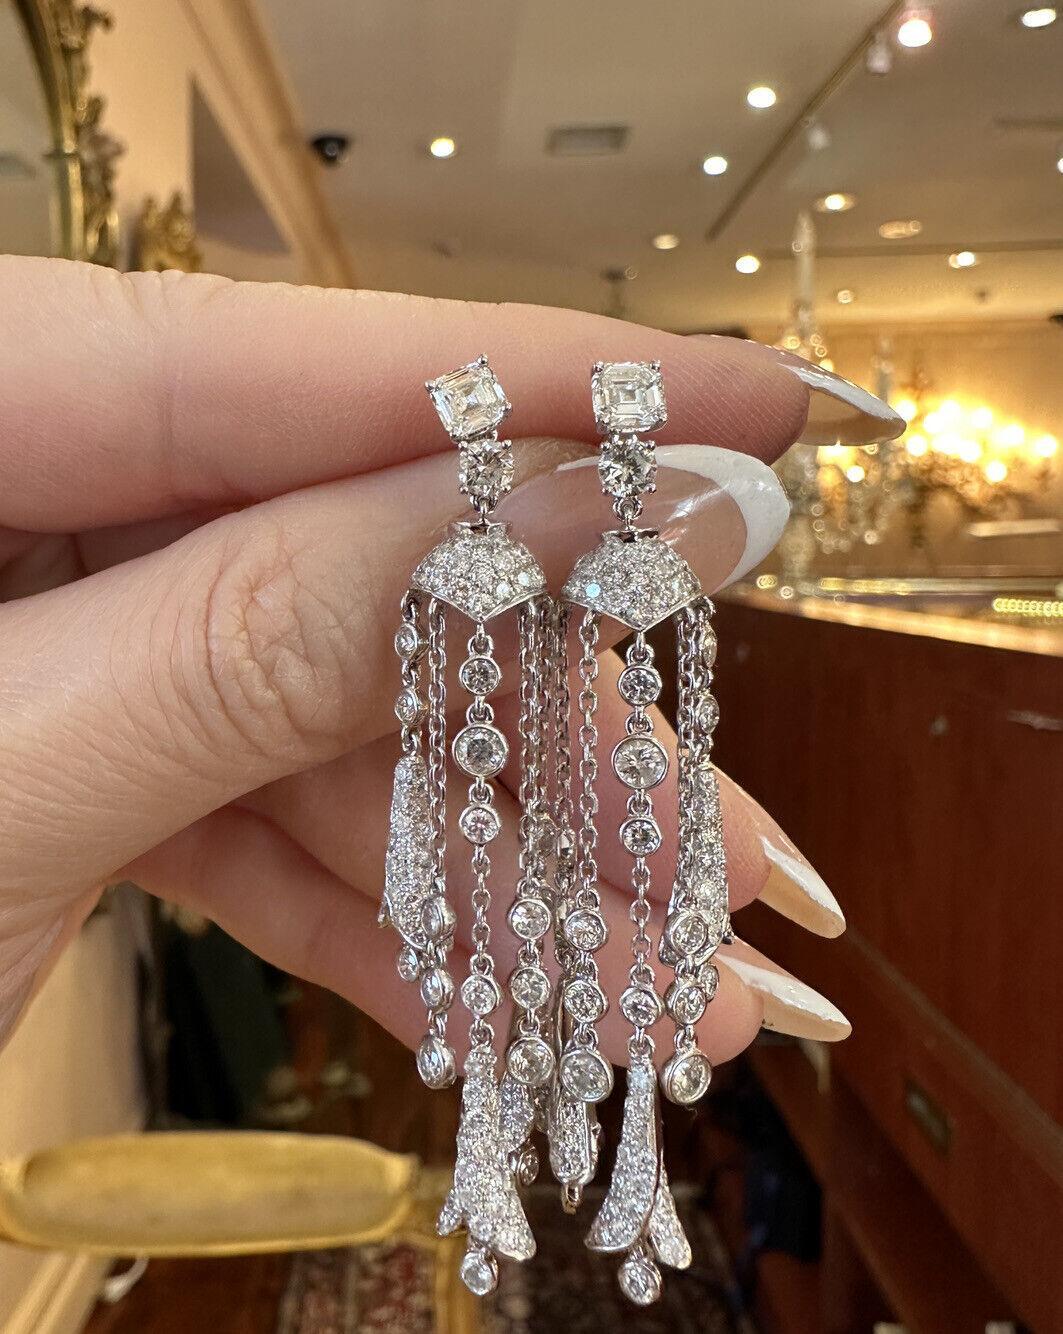 Diamond Chandelier Drop Earrings 5.25 Carat Total Weight in 18k White Gold 

Diamond Chandelier Earrings feature a single Asscher Cut and Round Brilliant Diamond at the top with chandelier of Pave diamond sections and bezel set diamonds hanging on